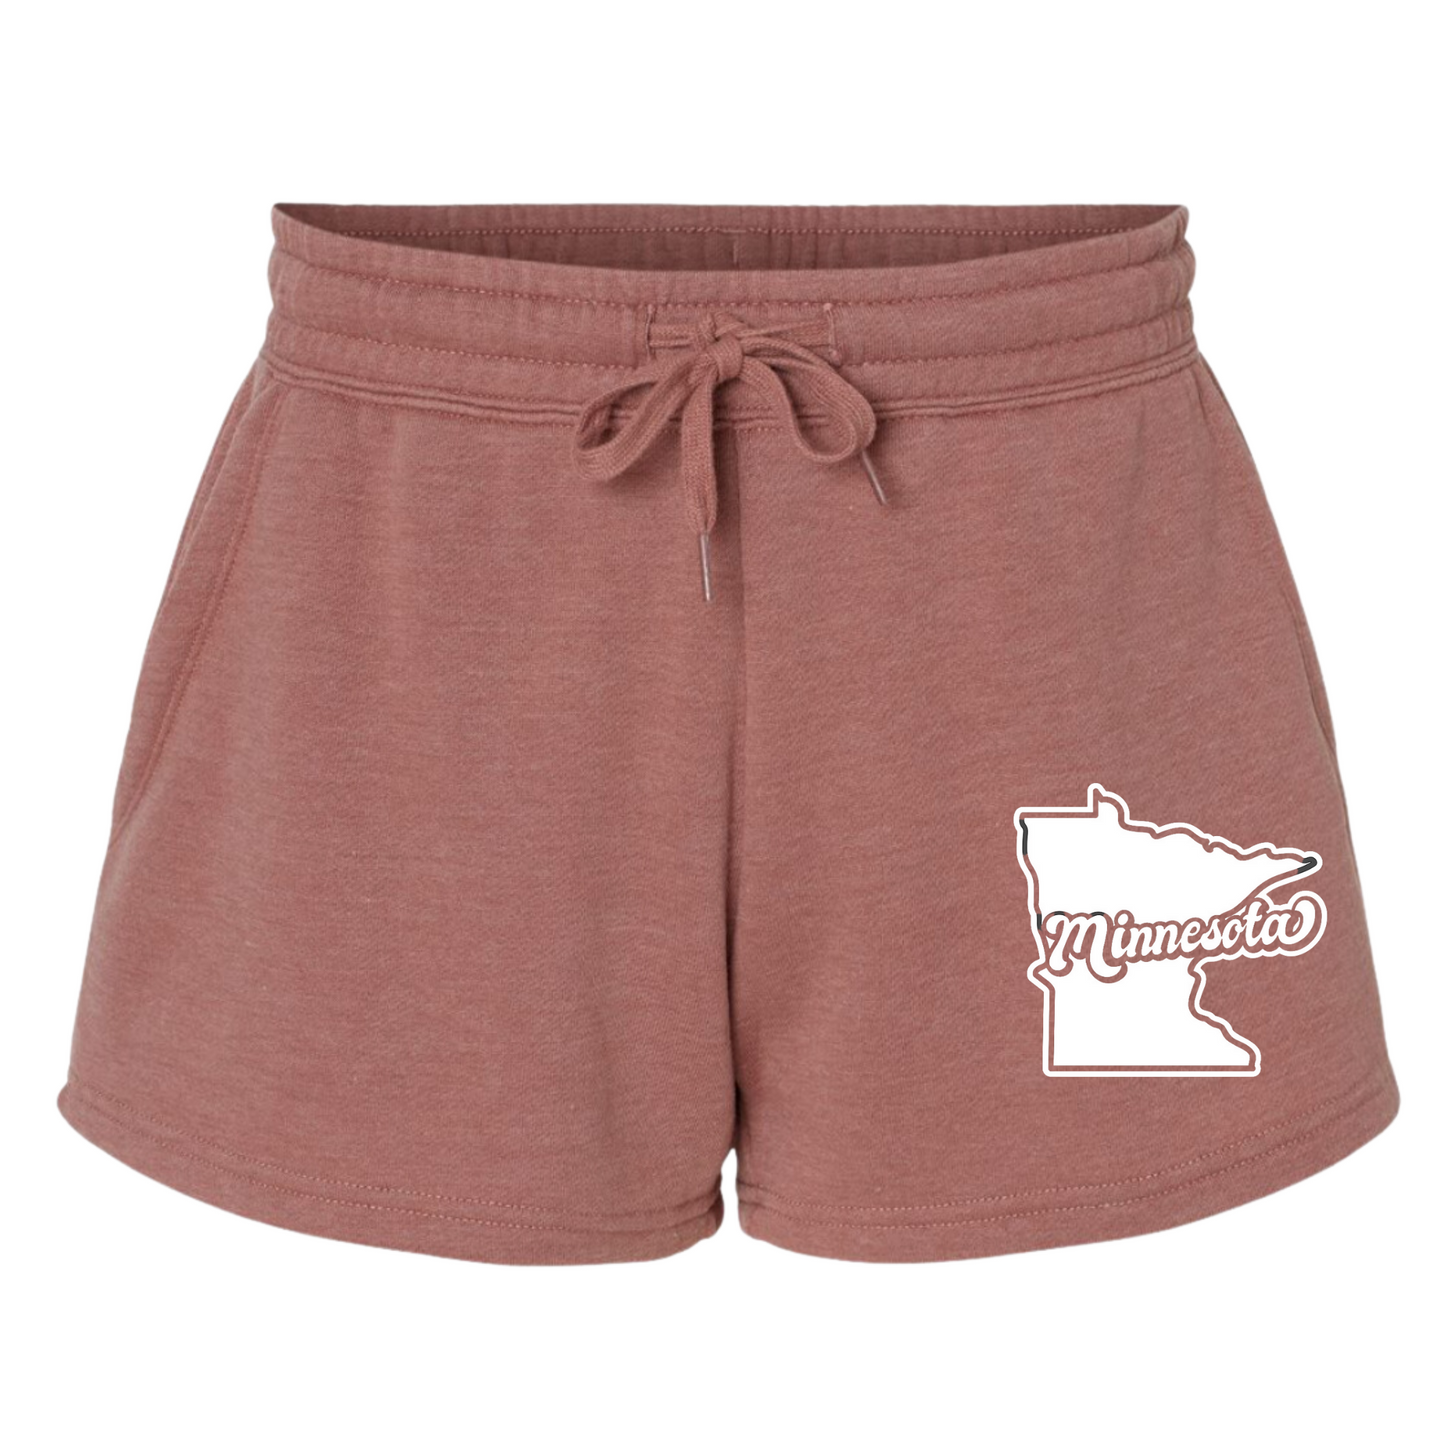 Minnesota Shorts in a light pink/red color with the state of minnesota emblem on the front right corner of the short with minnesota through it. This is the front view of the short.